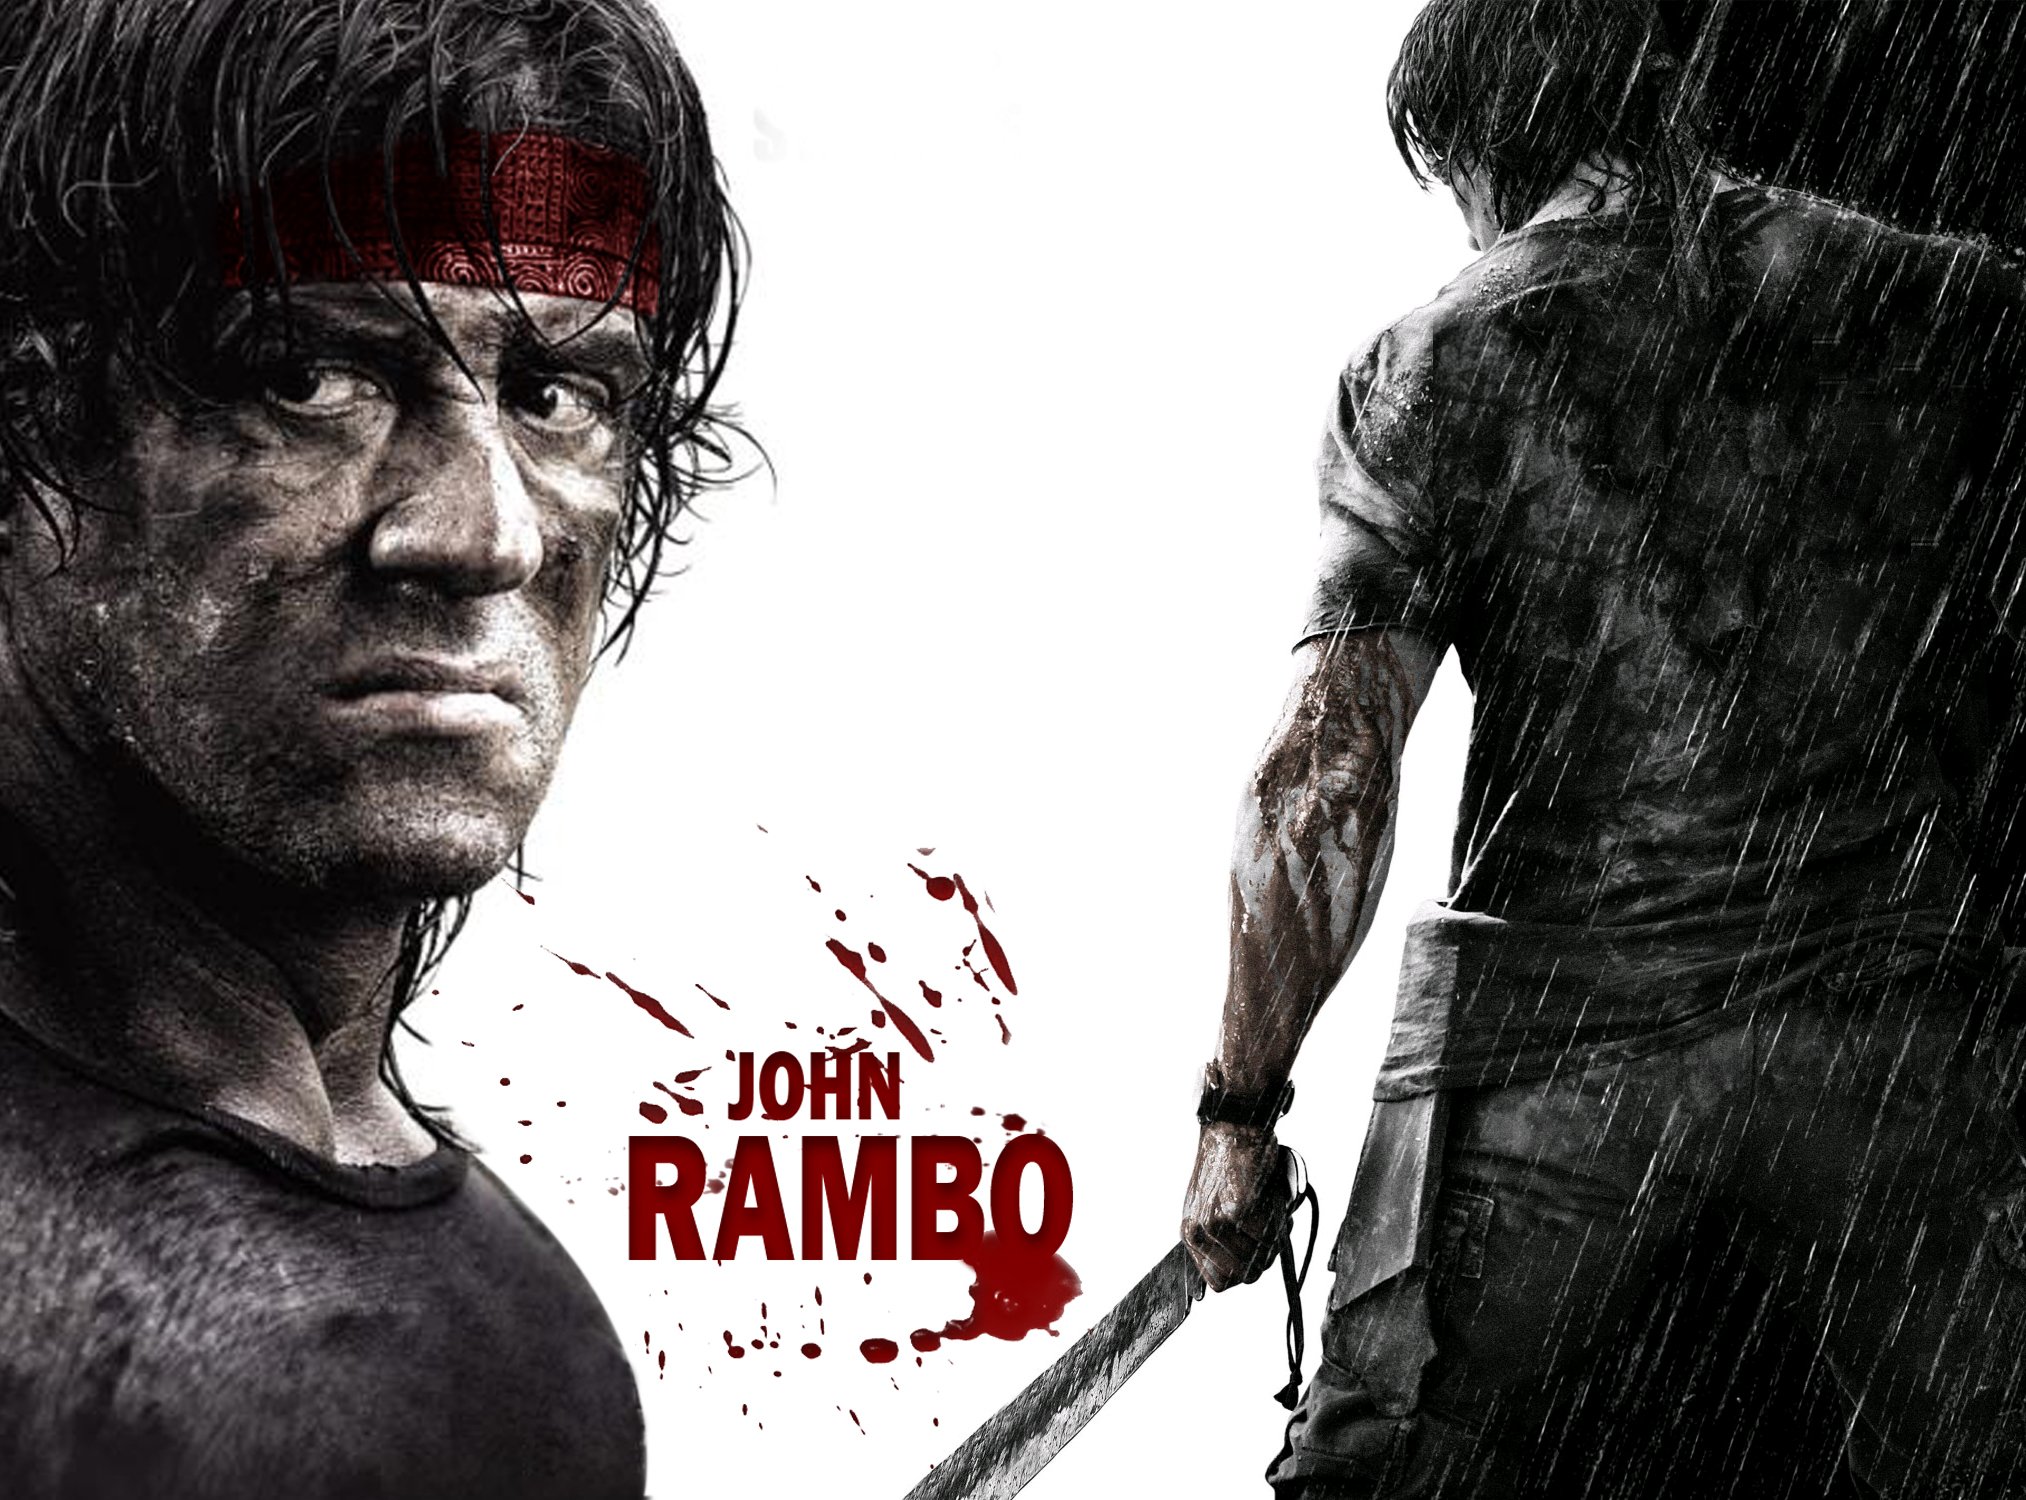 download free rambo the video game pc